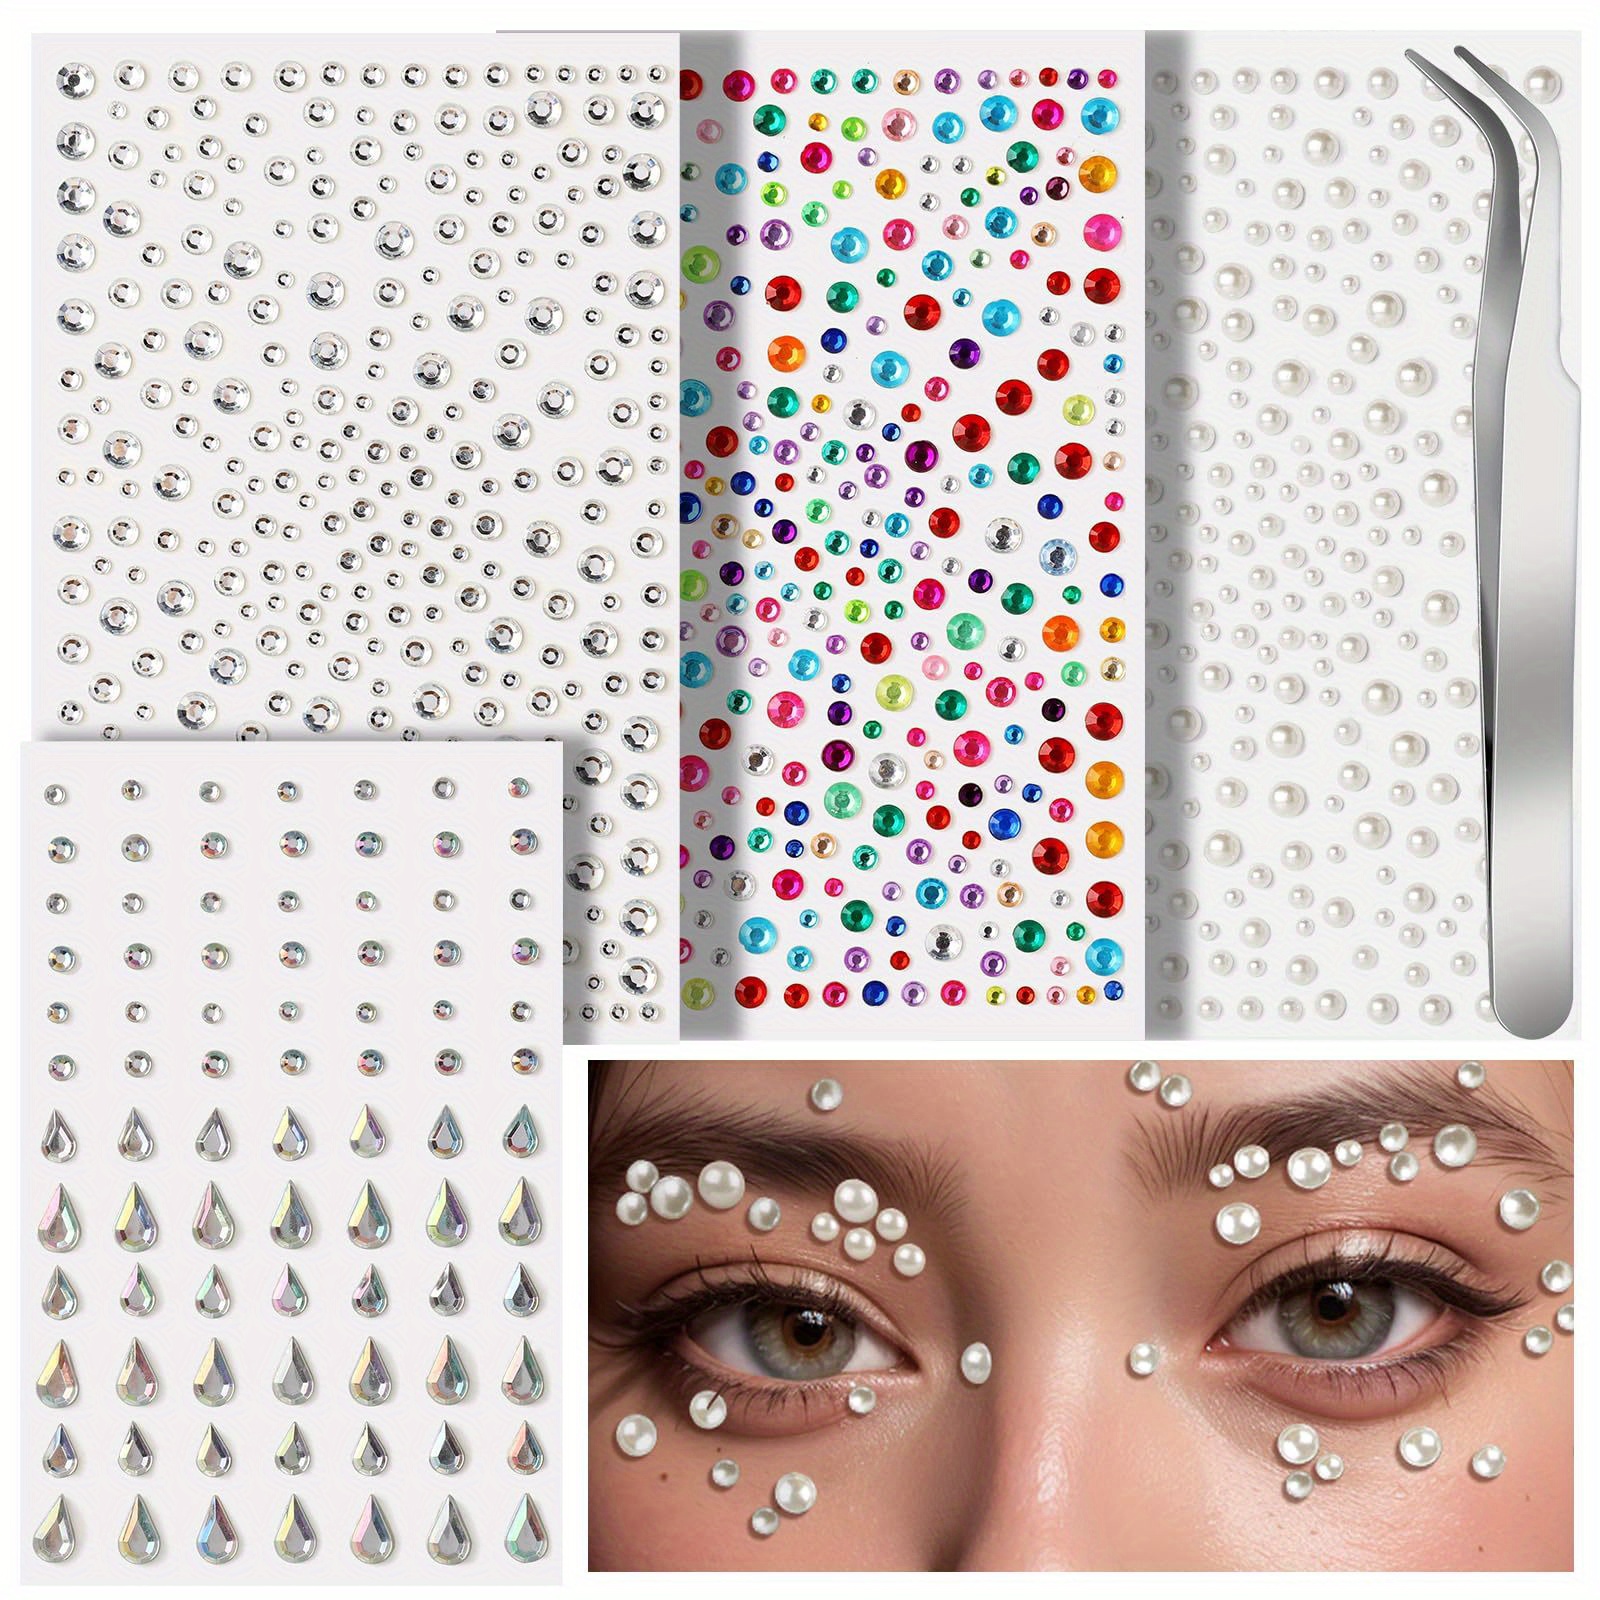  Douria 6 Sheets Face Gems Eye Gems Rhinestone Stickers Self  Adhesive Face Jewels for Makeup Pearl Rhinestones Rainbow Hair Nail Eye Face  Gems Stick on for Women : Beauty & Personal